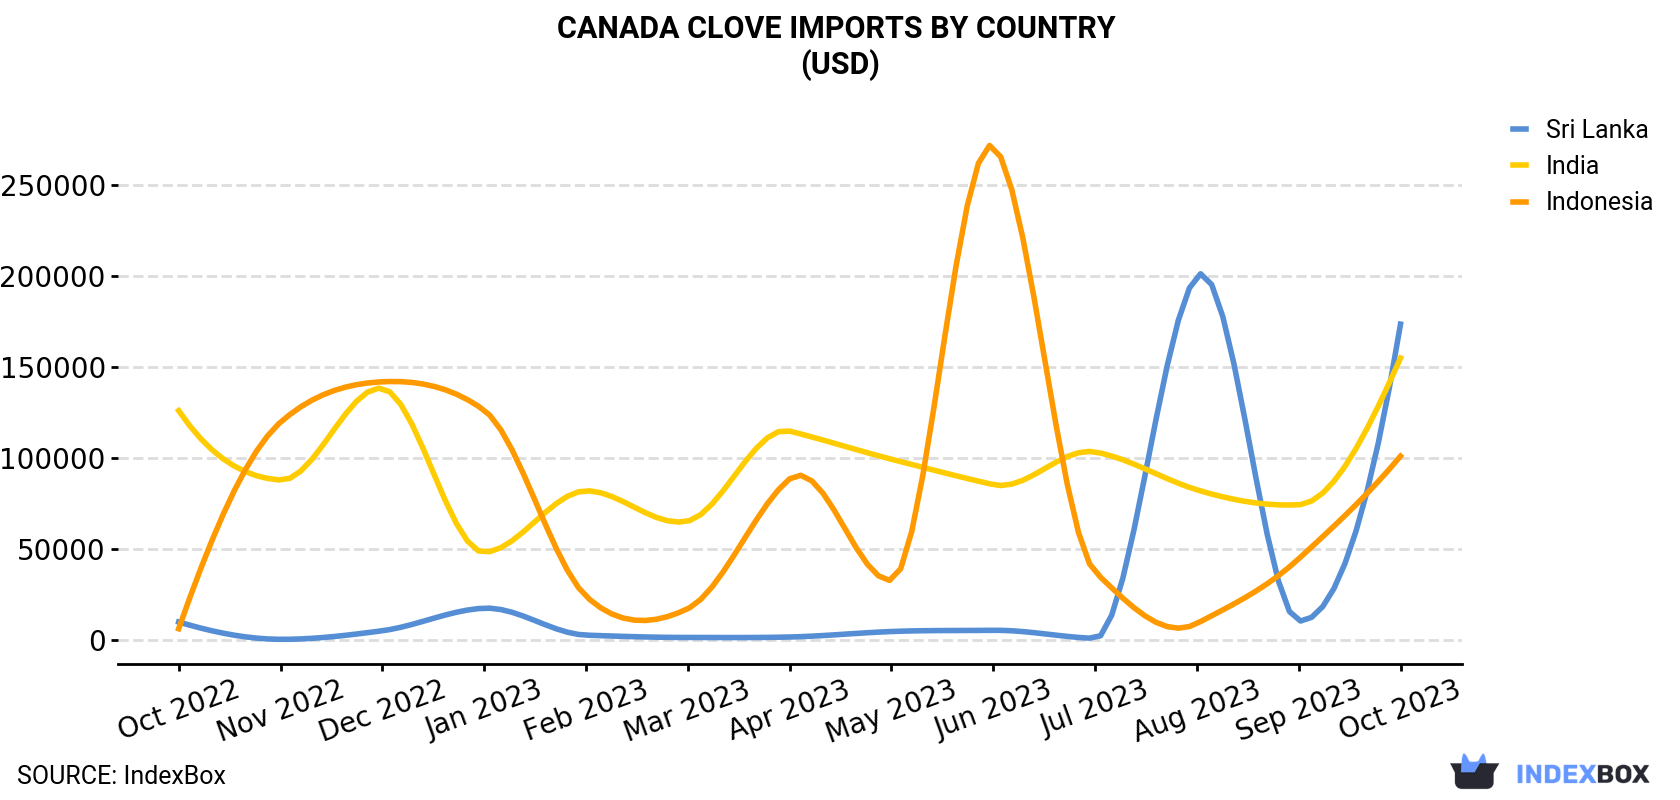 Canada Clove Imports By Country (USD)